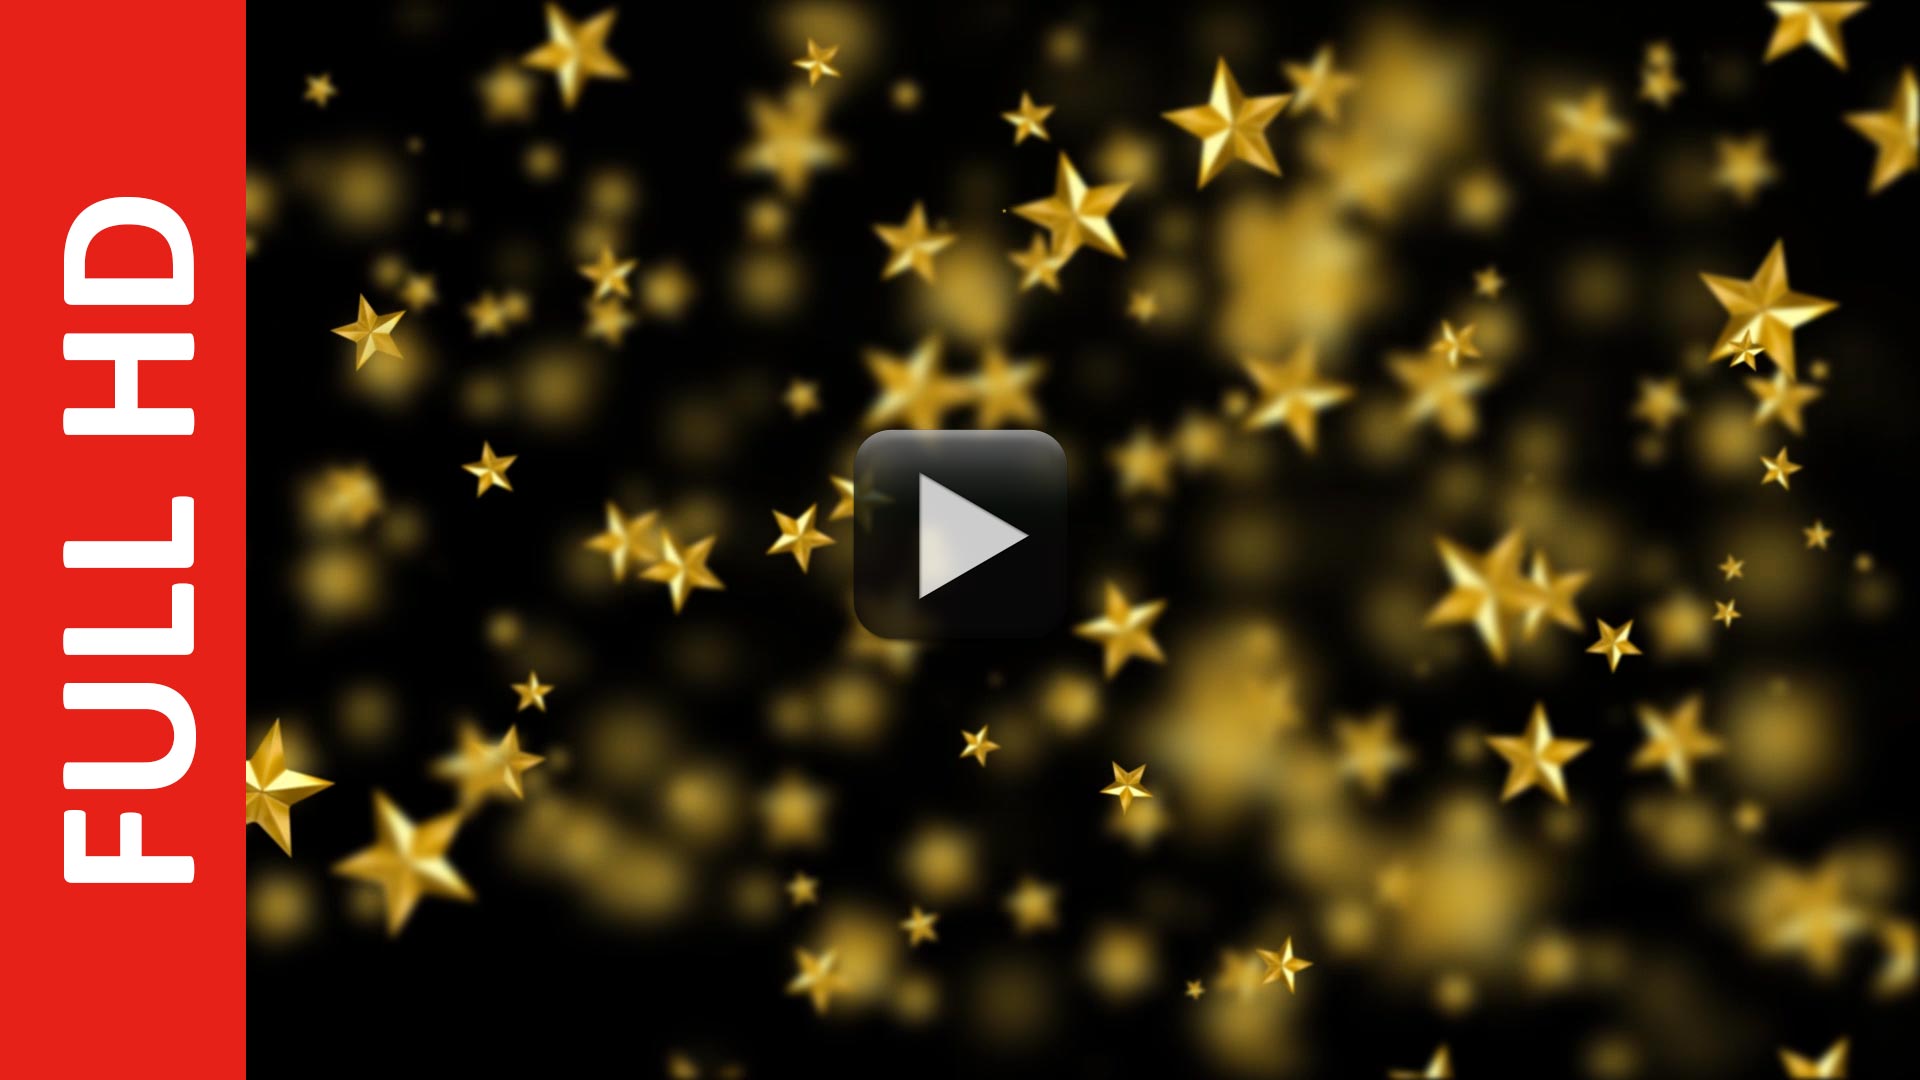 Video Star Blur Effect Animated Background | All Design Creative